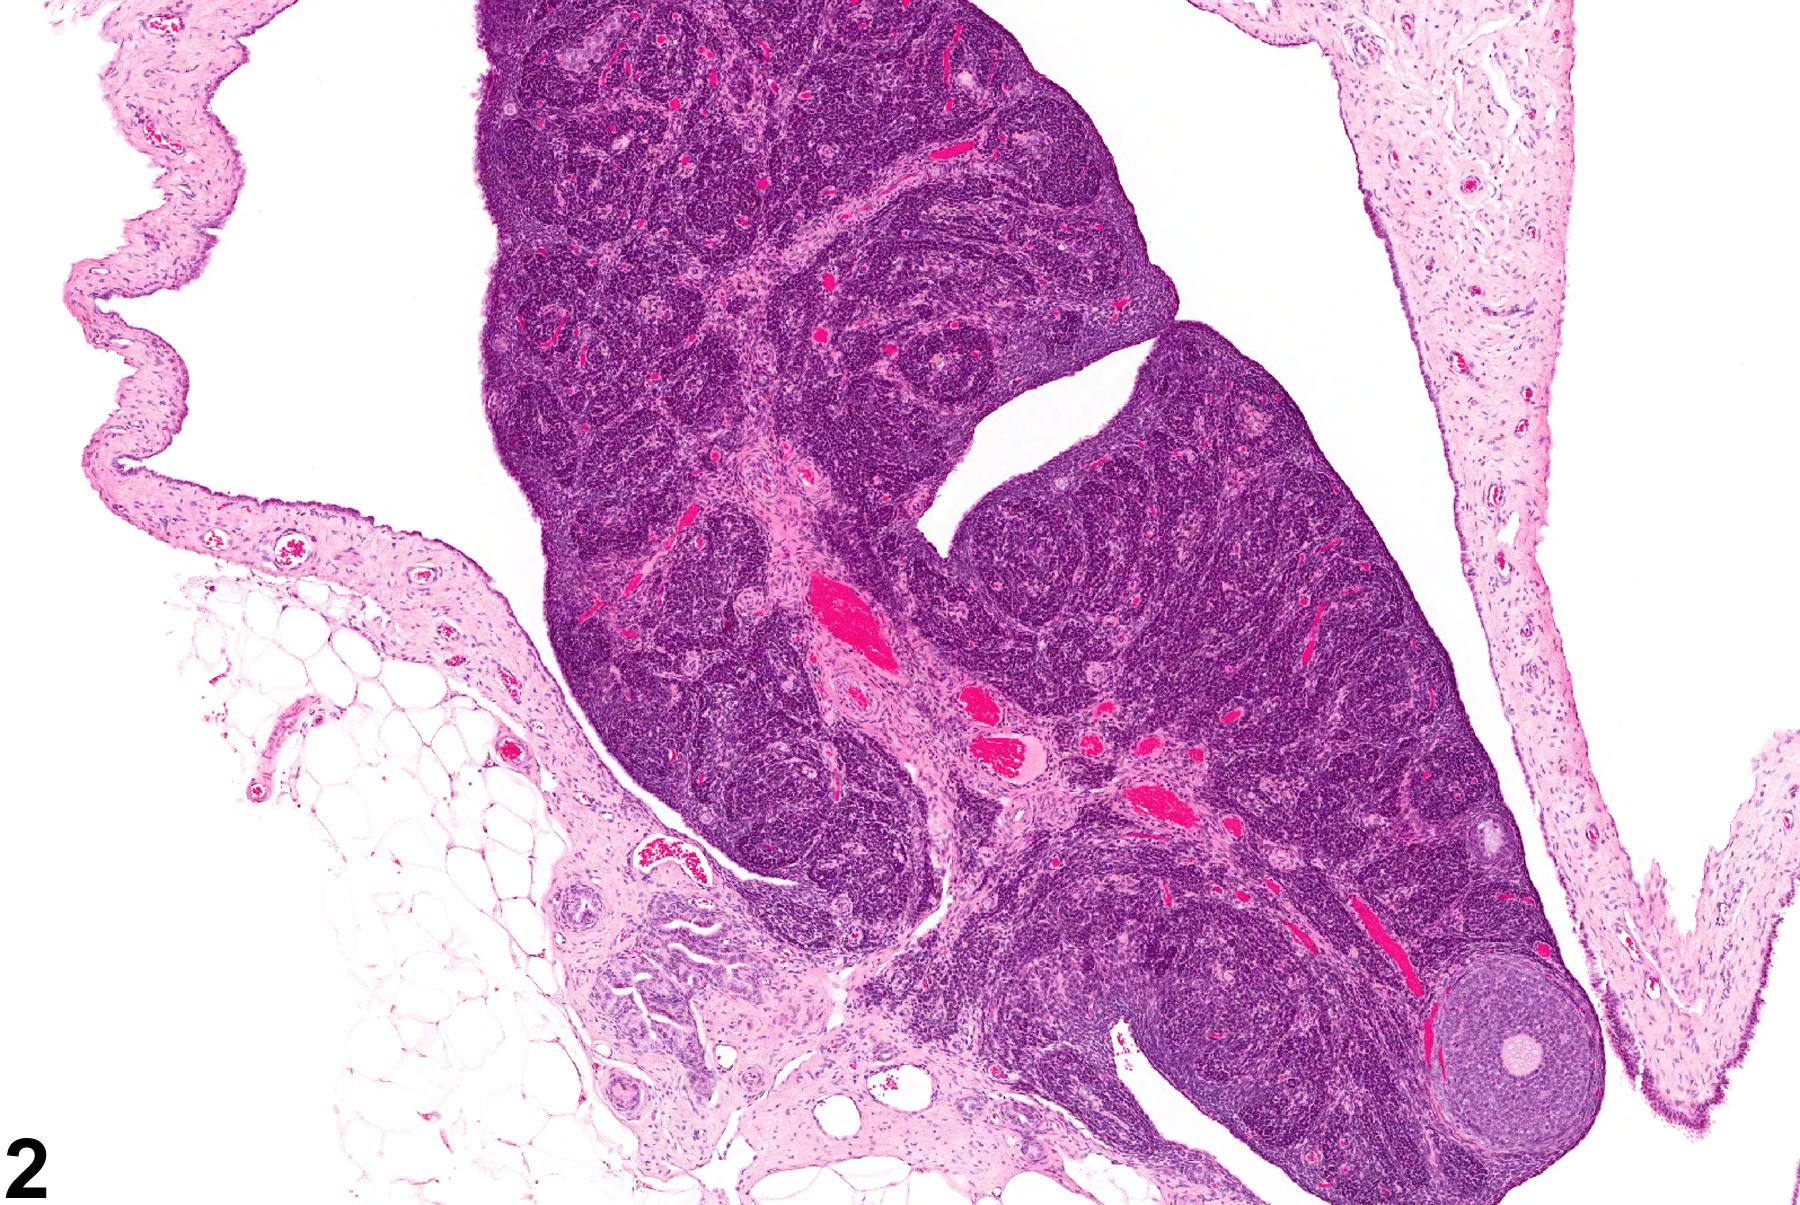 Image of atrophy in the ovary from a female F344/N rat in a chronic study